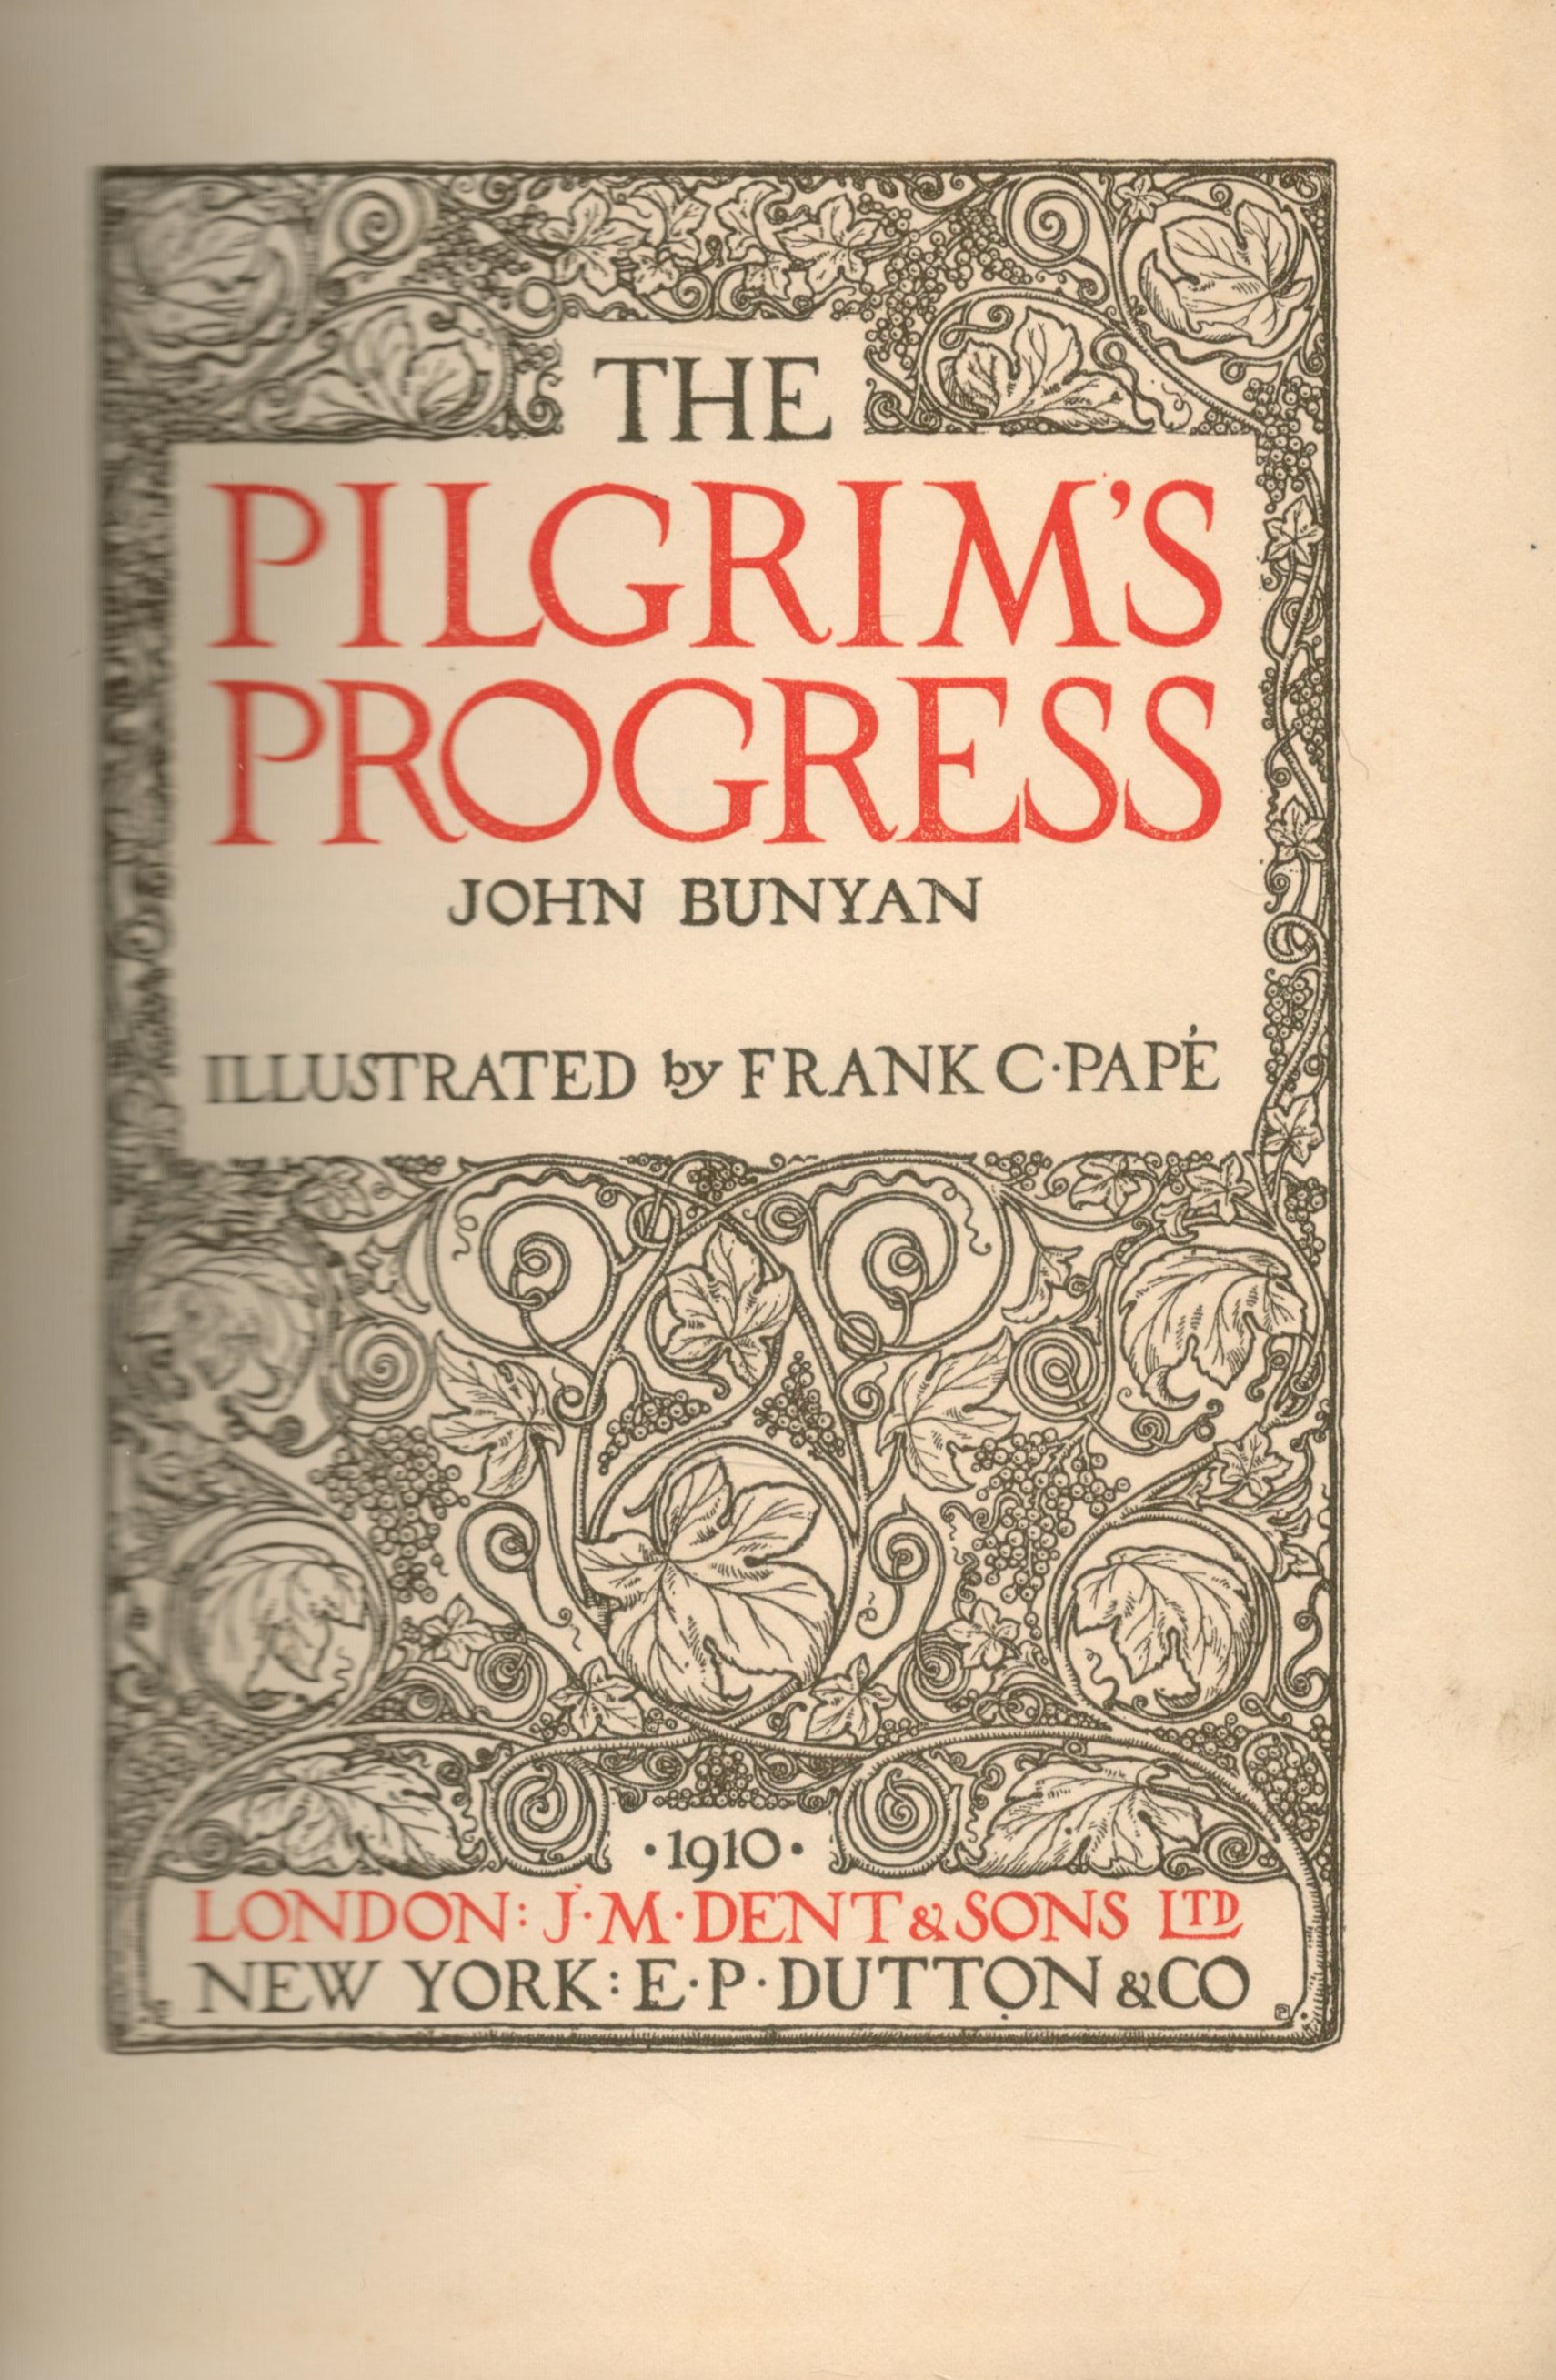 John Bunyan The Pilgrim's Progress. Illustrated by Frank C. Pape. Published by J. M. Dent and Sons - Image 2 of 2